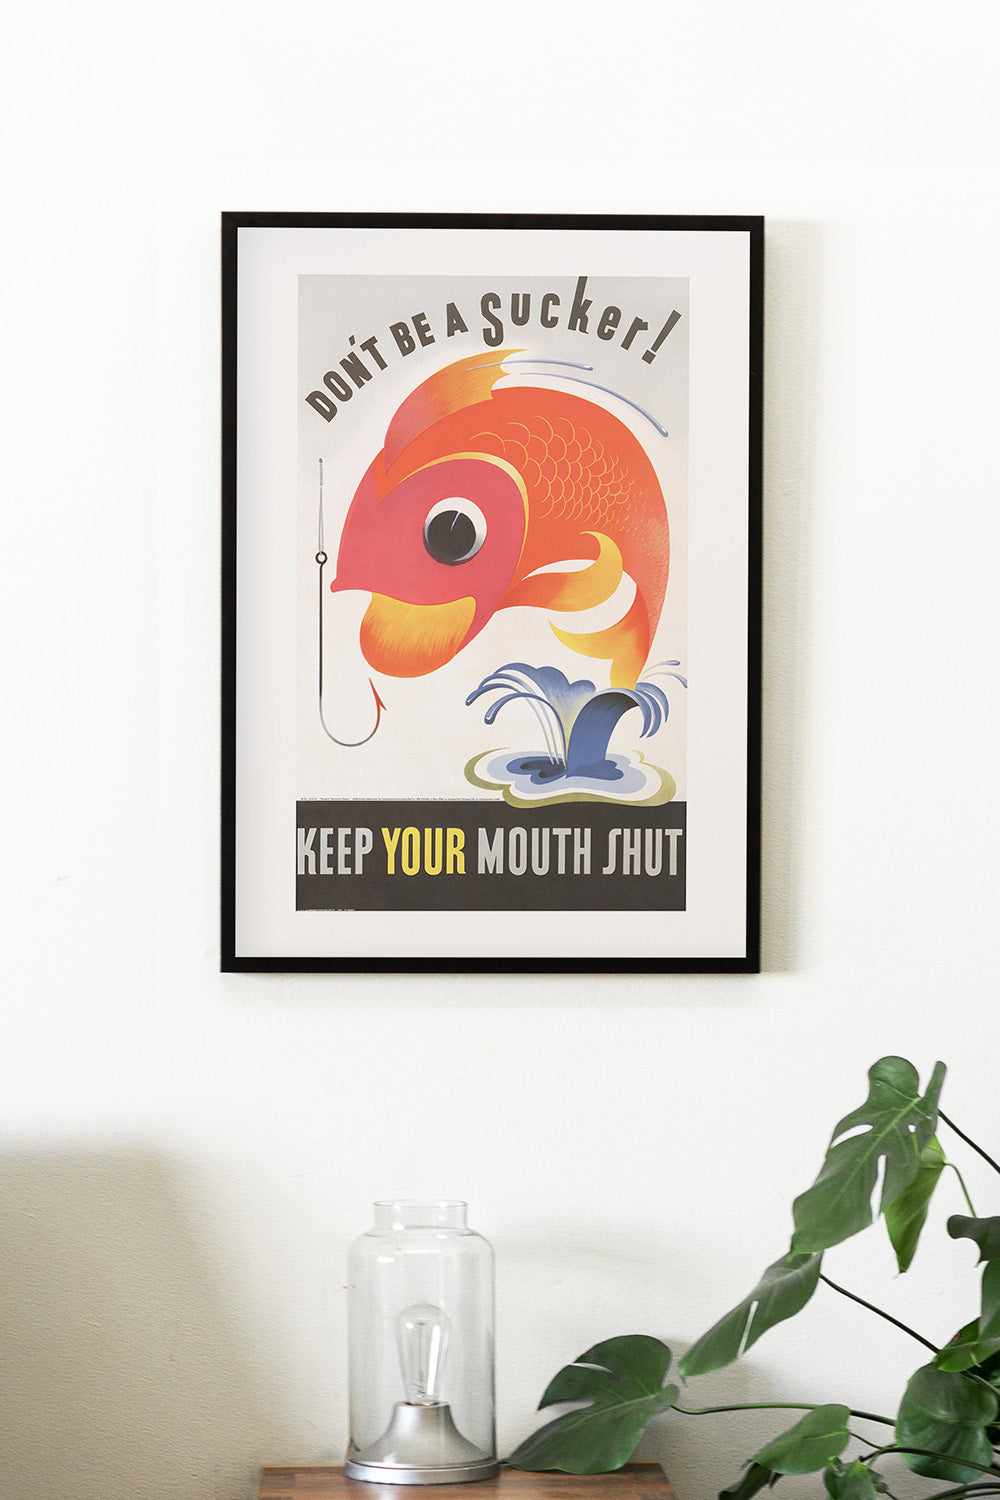 Vintage poster art print of an orange fish beside a hook with playful text warnings.